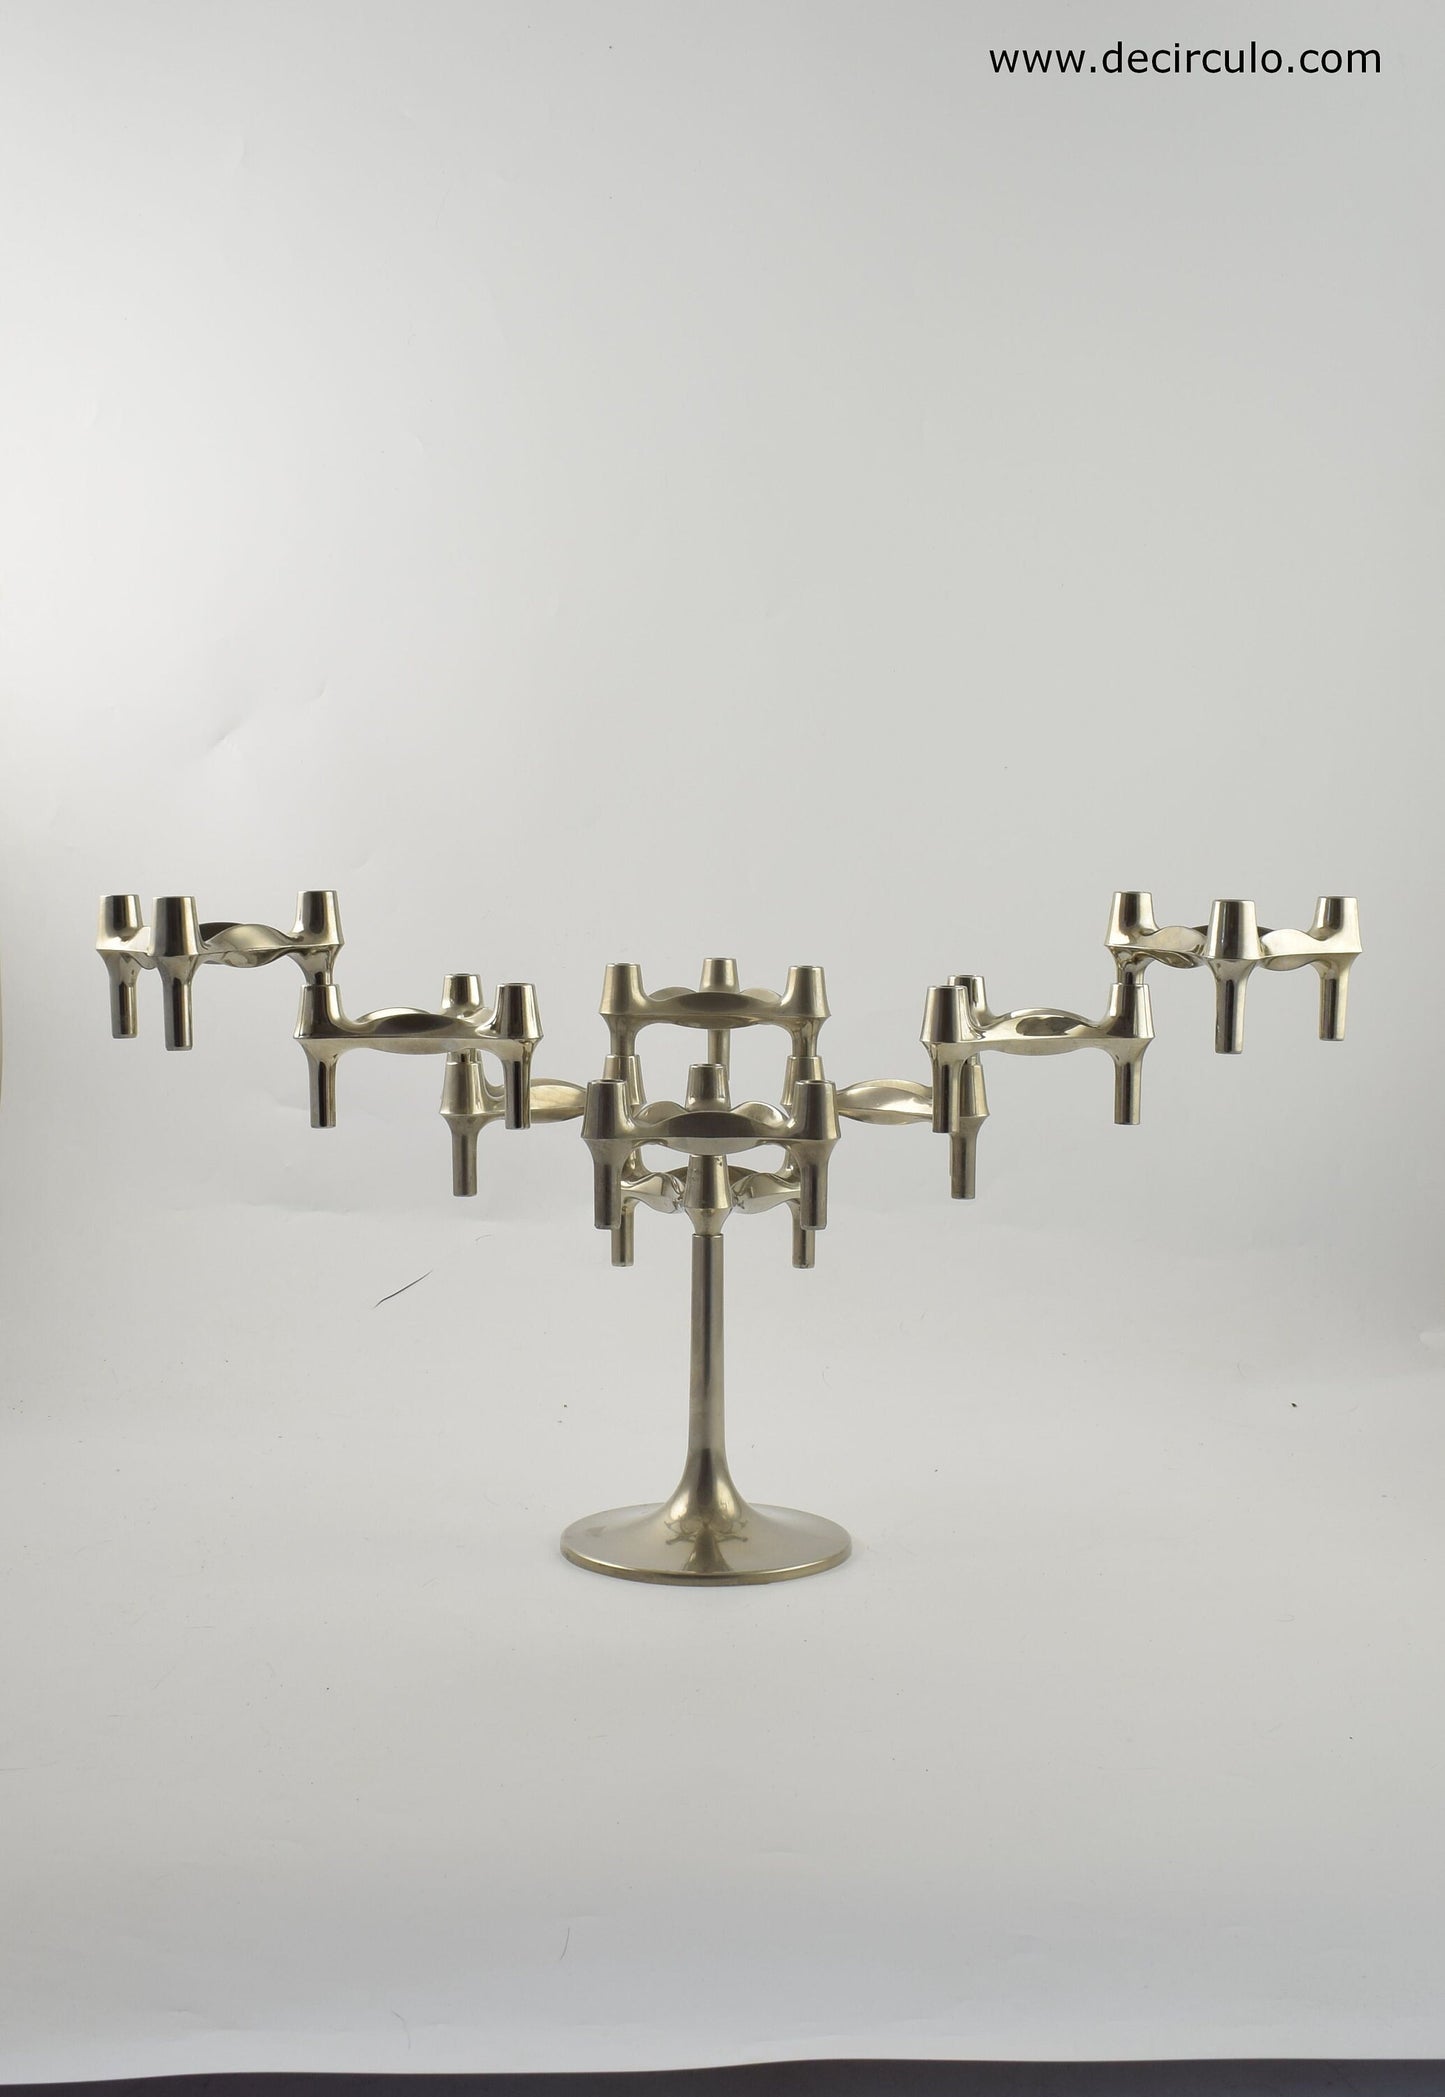 Set of 9 nagel Candle holders plus base designed by Ceasar Stoffi and Fritz Nagel and manufactured by BMF